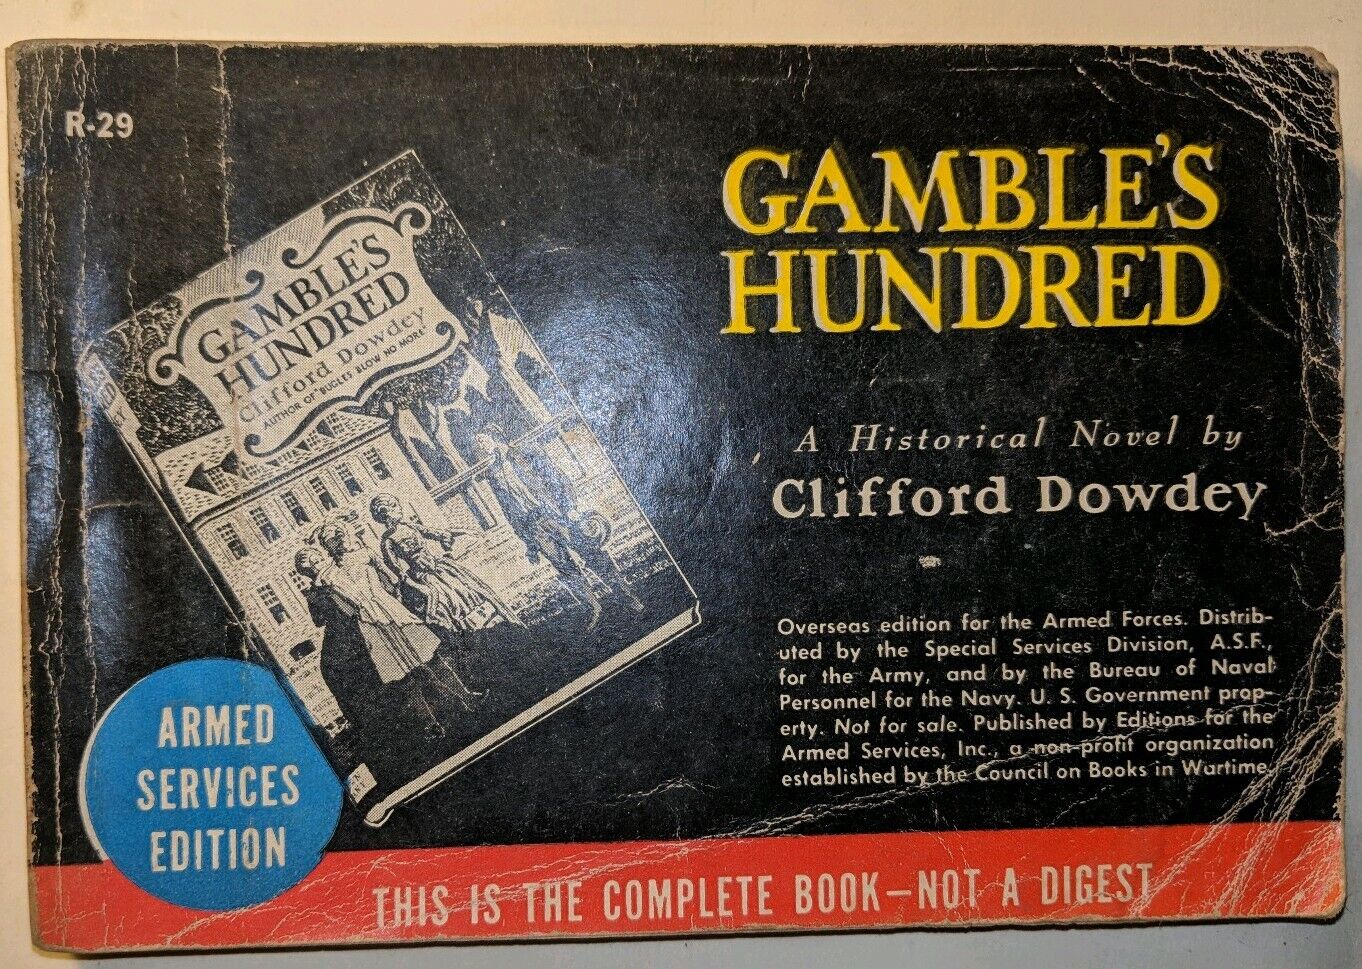 Gamble\'s Hundred, by C Dowdey, R-29, Armed Services Edition, WWII